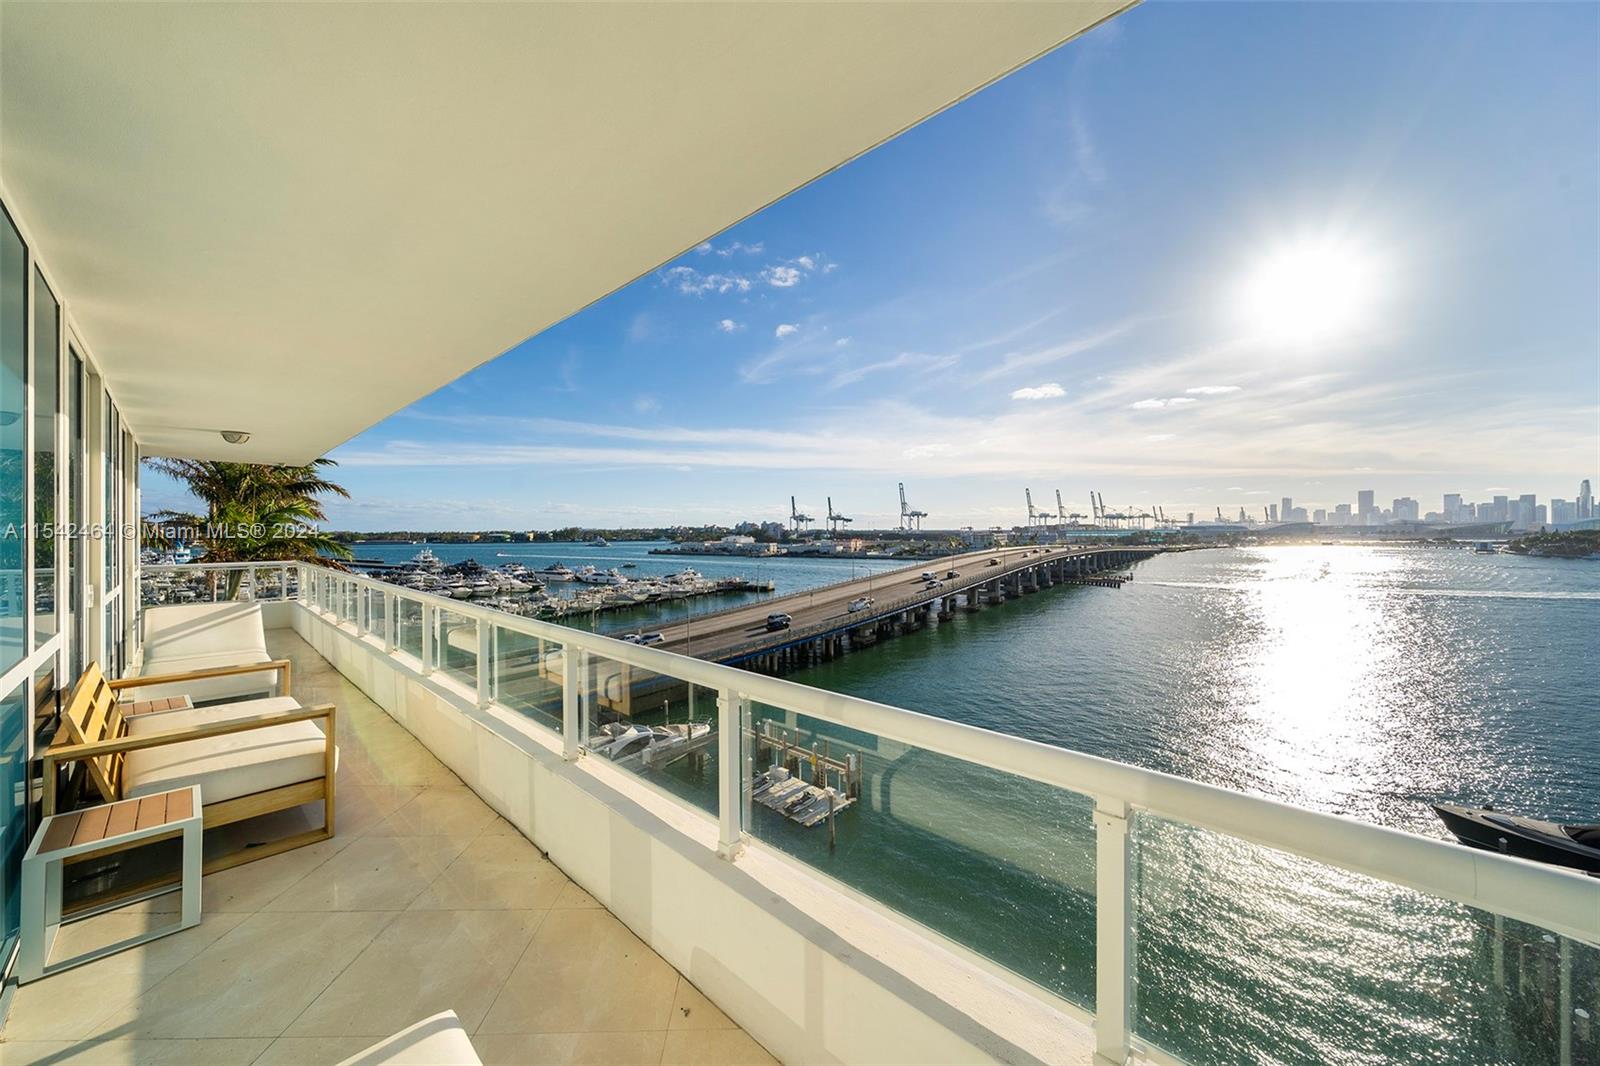 Enjoy breathtaking views of Biscayne Bay and the Miami skyline from this ready-to-move-in 3 bedroom, 3.5 bathroom in the heart of Miami  Beach. The residence features an upgraded kitchen with white quartz countertops and top-of-the-line appliances, including wine cooler, en suite bathrooms for each bedroom, and ample closet space supplemented by built ins. Witness the most incredible sunsets through the floor to ceiling windows, and the oversized wrap around balconies. The Bentley Bay is a full service luxury building located across the street from the newly opened Canopy Park, and in proximity to the Beach, and some of the best restaurants Miami Beach has to offer. Its residents enjoy the infinity pool, gym, sauna and steam room on the premises, and all the services of a luxury building.